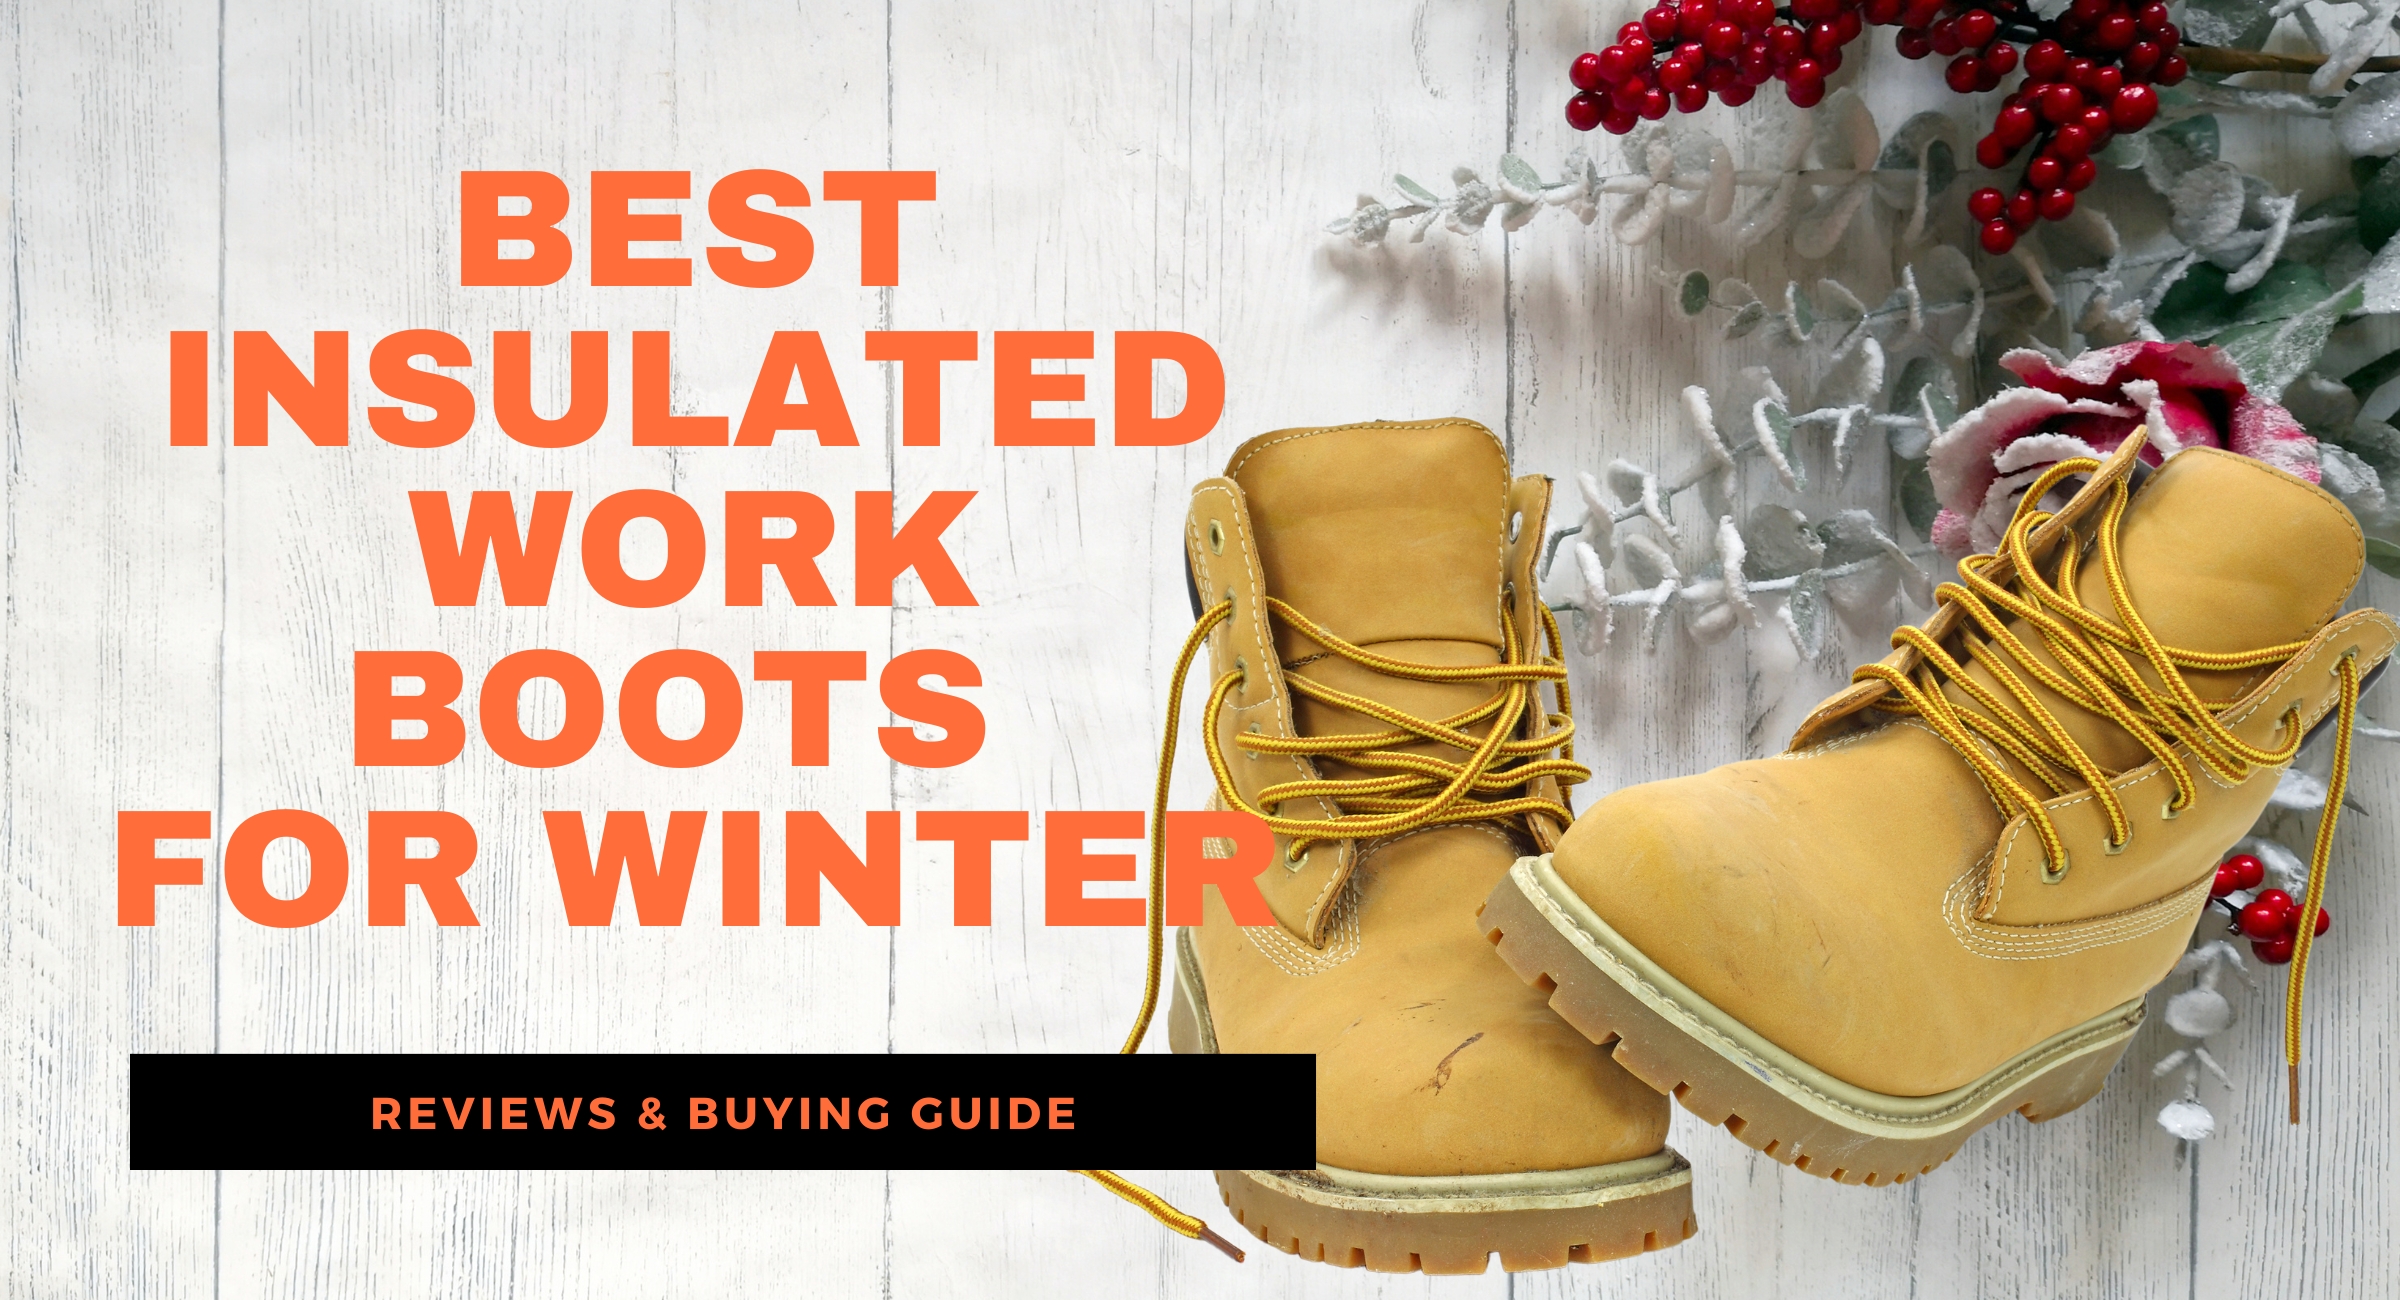 Best Insulated Work Boots For Winter